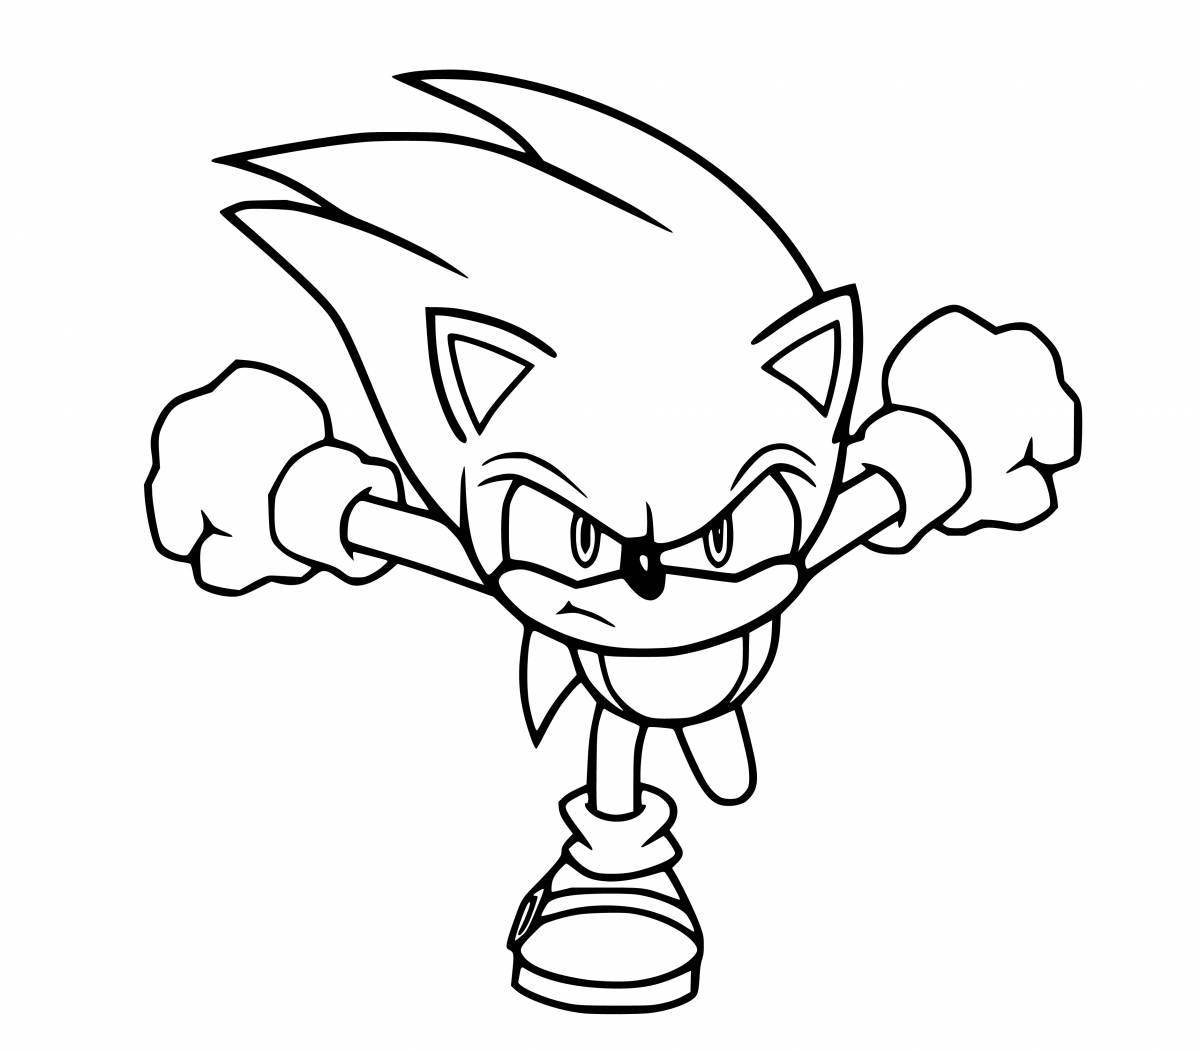 Great sonic theos coloring book